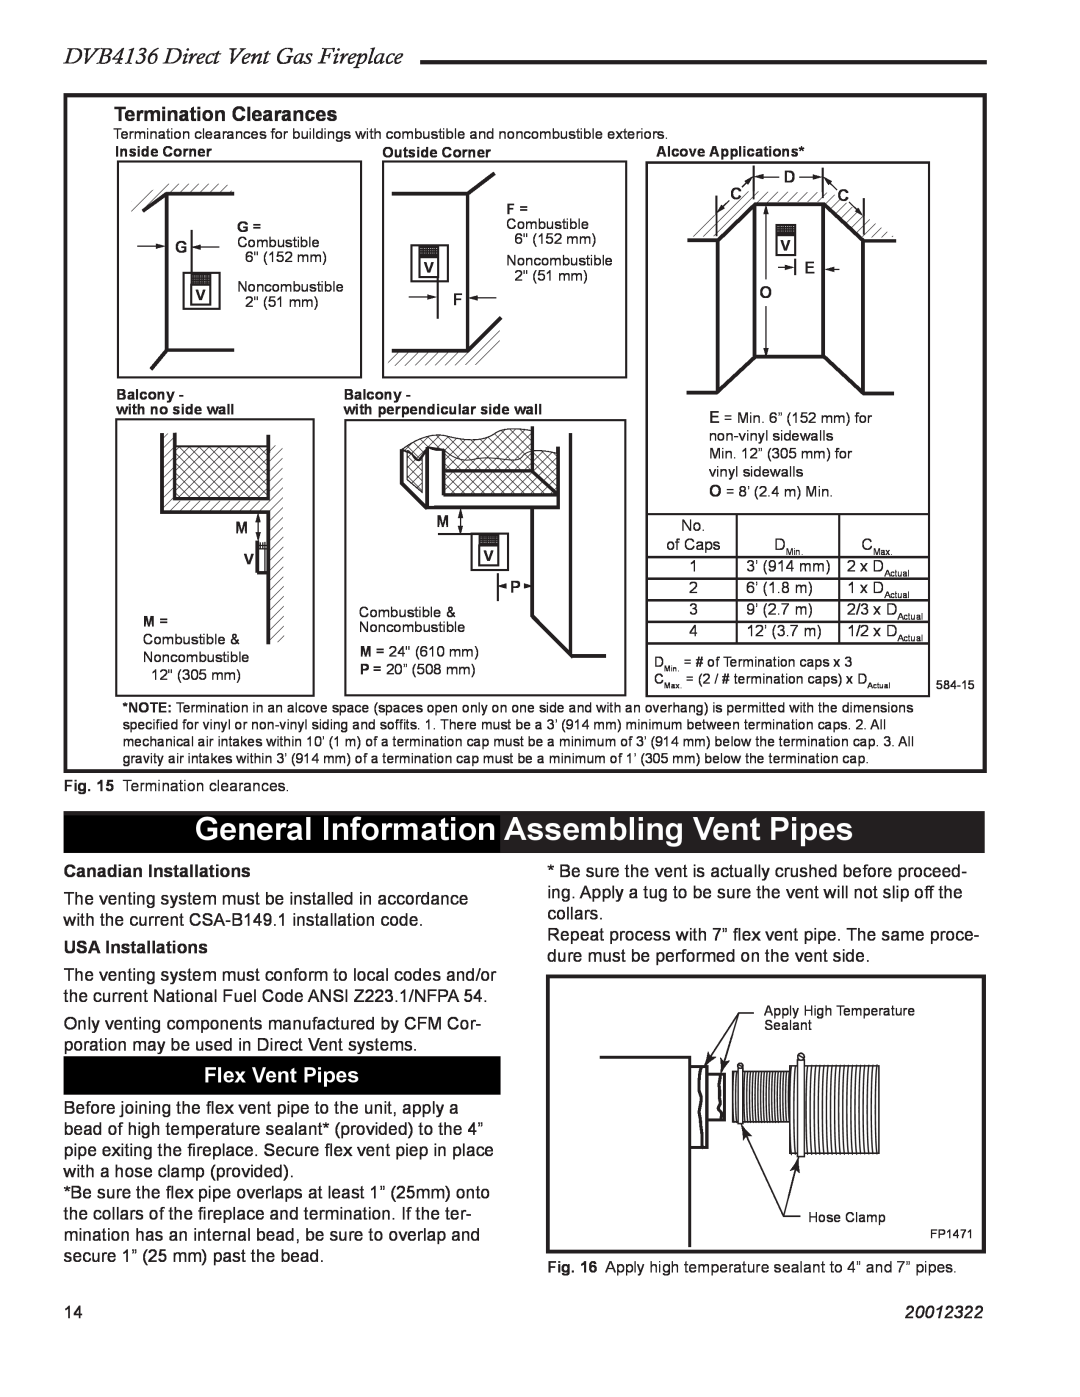 Majestic Appliances manual General Information Assembling Vent Pipes, Flex Vent Pipes, DVB4136 Direct Vent Gas Fireplace 